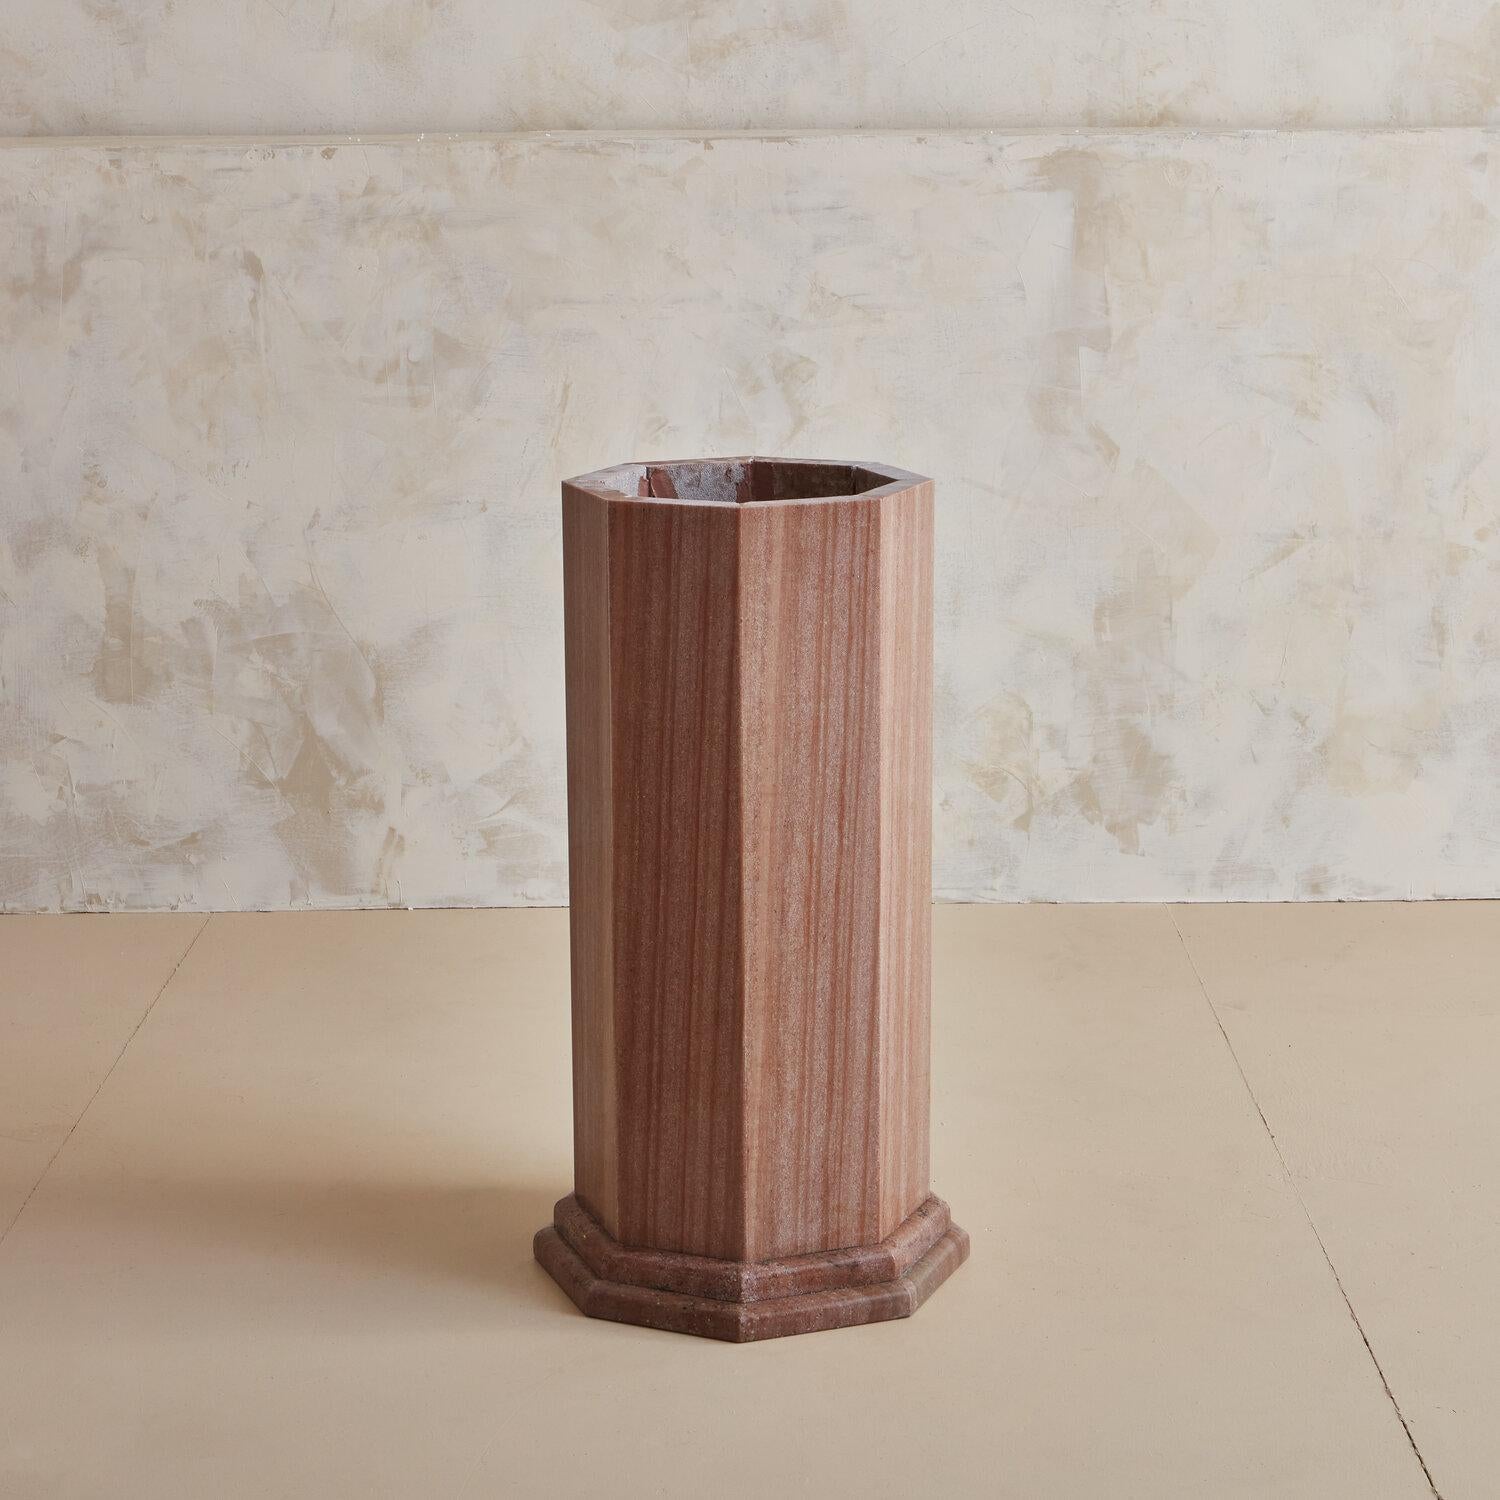 A stunning marble dining or entryway table with a round top resting on a hexagonal mitered edge base with a banded-edge detail. The marble is a gorgeous rust color with brown and red tones featuring straight vertical veins. 

Dimensions: 30”